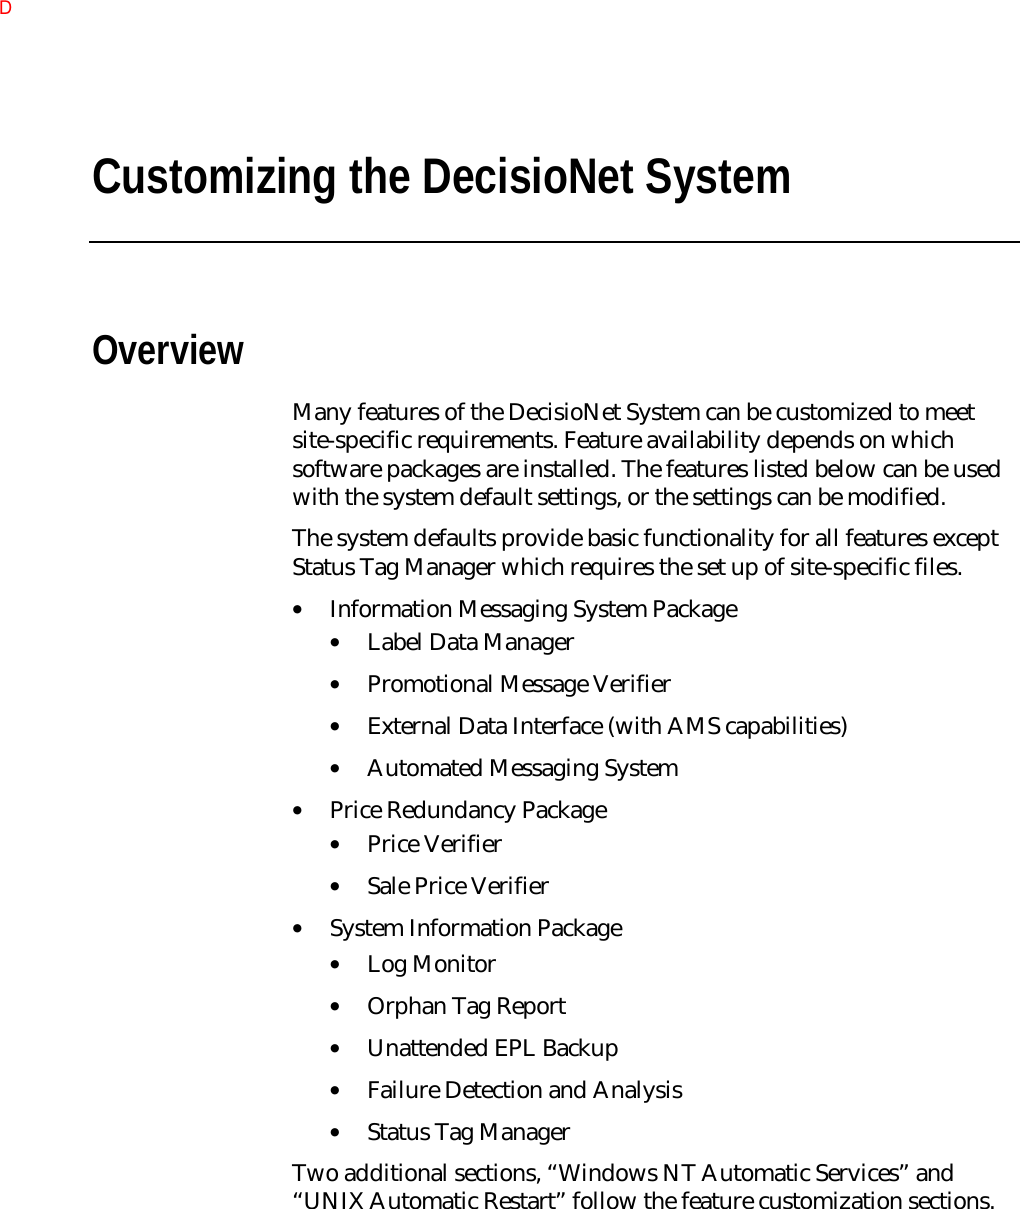 Customizing the DecisioNet SystemOverviewMany features of the DecisioNet System can be customized to meetsite-specific requirements. Feature availability depends on whichsoftware packages are installed. The features listed below can be usedwith the system default settings, or the settings can be modified.The system defaults provide basic functionality for all features exceptStatus Tag Manager which requires the set up of site-specific files.• Information Messaging System Package• Label Data Manager• Promotional Message Verifier• External Data Interface (with AMS capabilities)• Automated Messaging System• Price Redundancy Package• Price Verifier• Sale Price Verifier• System Information Package• Log Monitor• Orphan Tag Report• Unattended EPL Backup• Failure Detection and Analysis• Status Tag ManagerTwo additional sections, “Windows NT Automatic Services” and“UNIX Automatic Restart” follow the feature customization sections.D